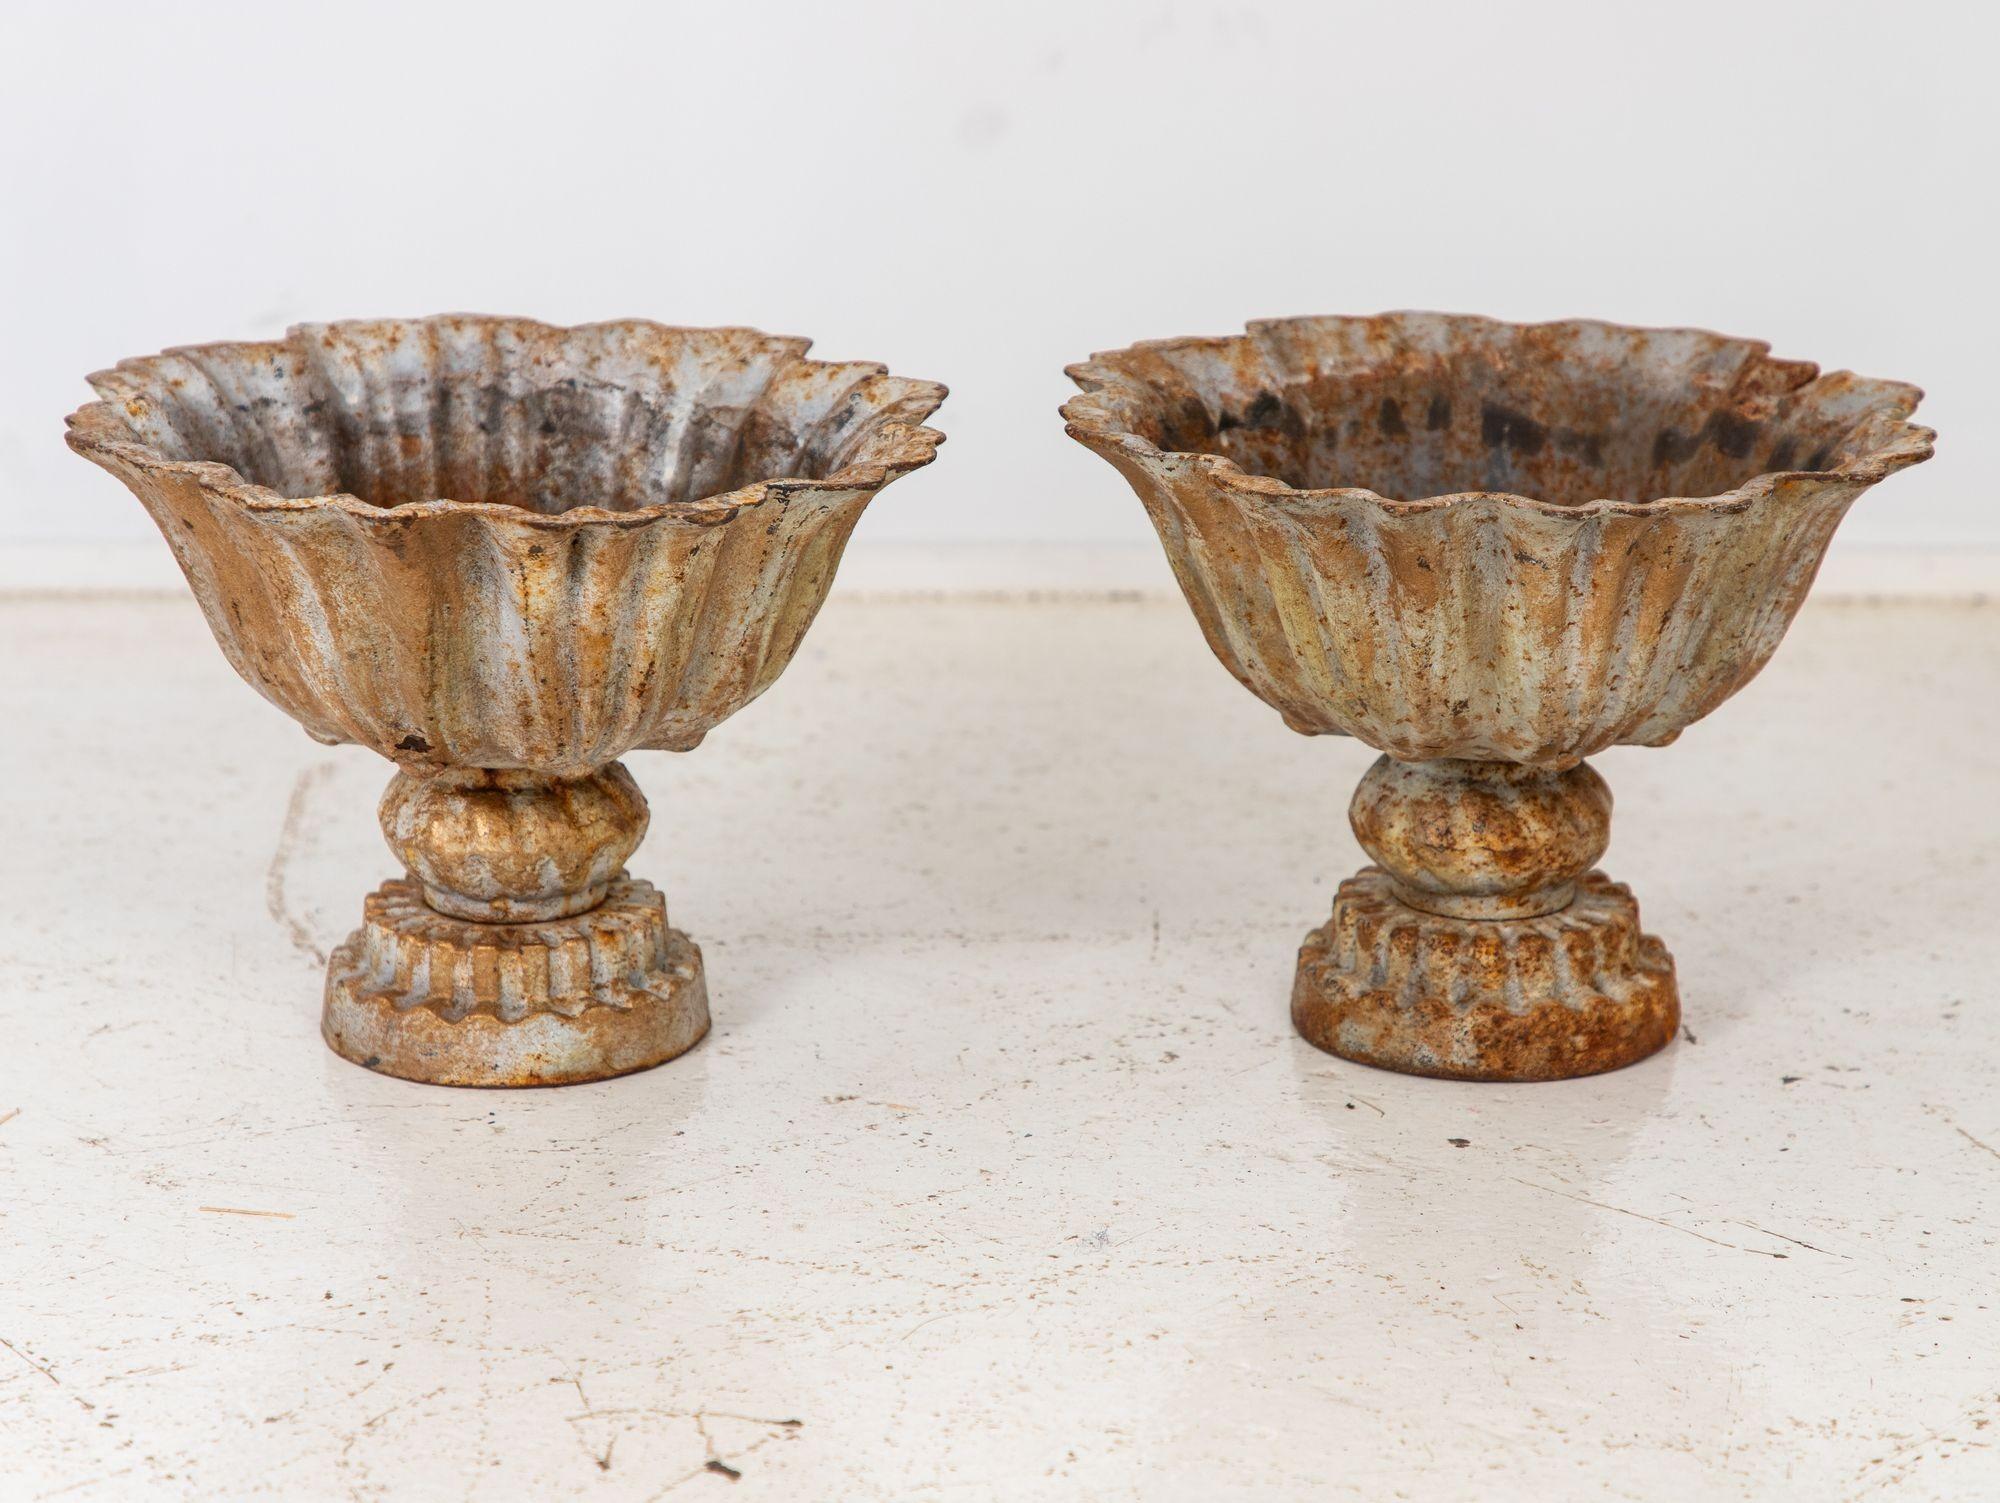 This captivating pair of late 20th-century iron tazzas exhibits a distinct verdigris patina, imbuing them with an aura of antiquity. Meticulously crafted, their wide, shallow bowls perch atop pedestals. The rich green-blue hue, a result of painted